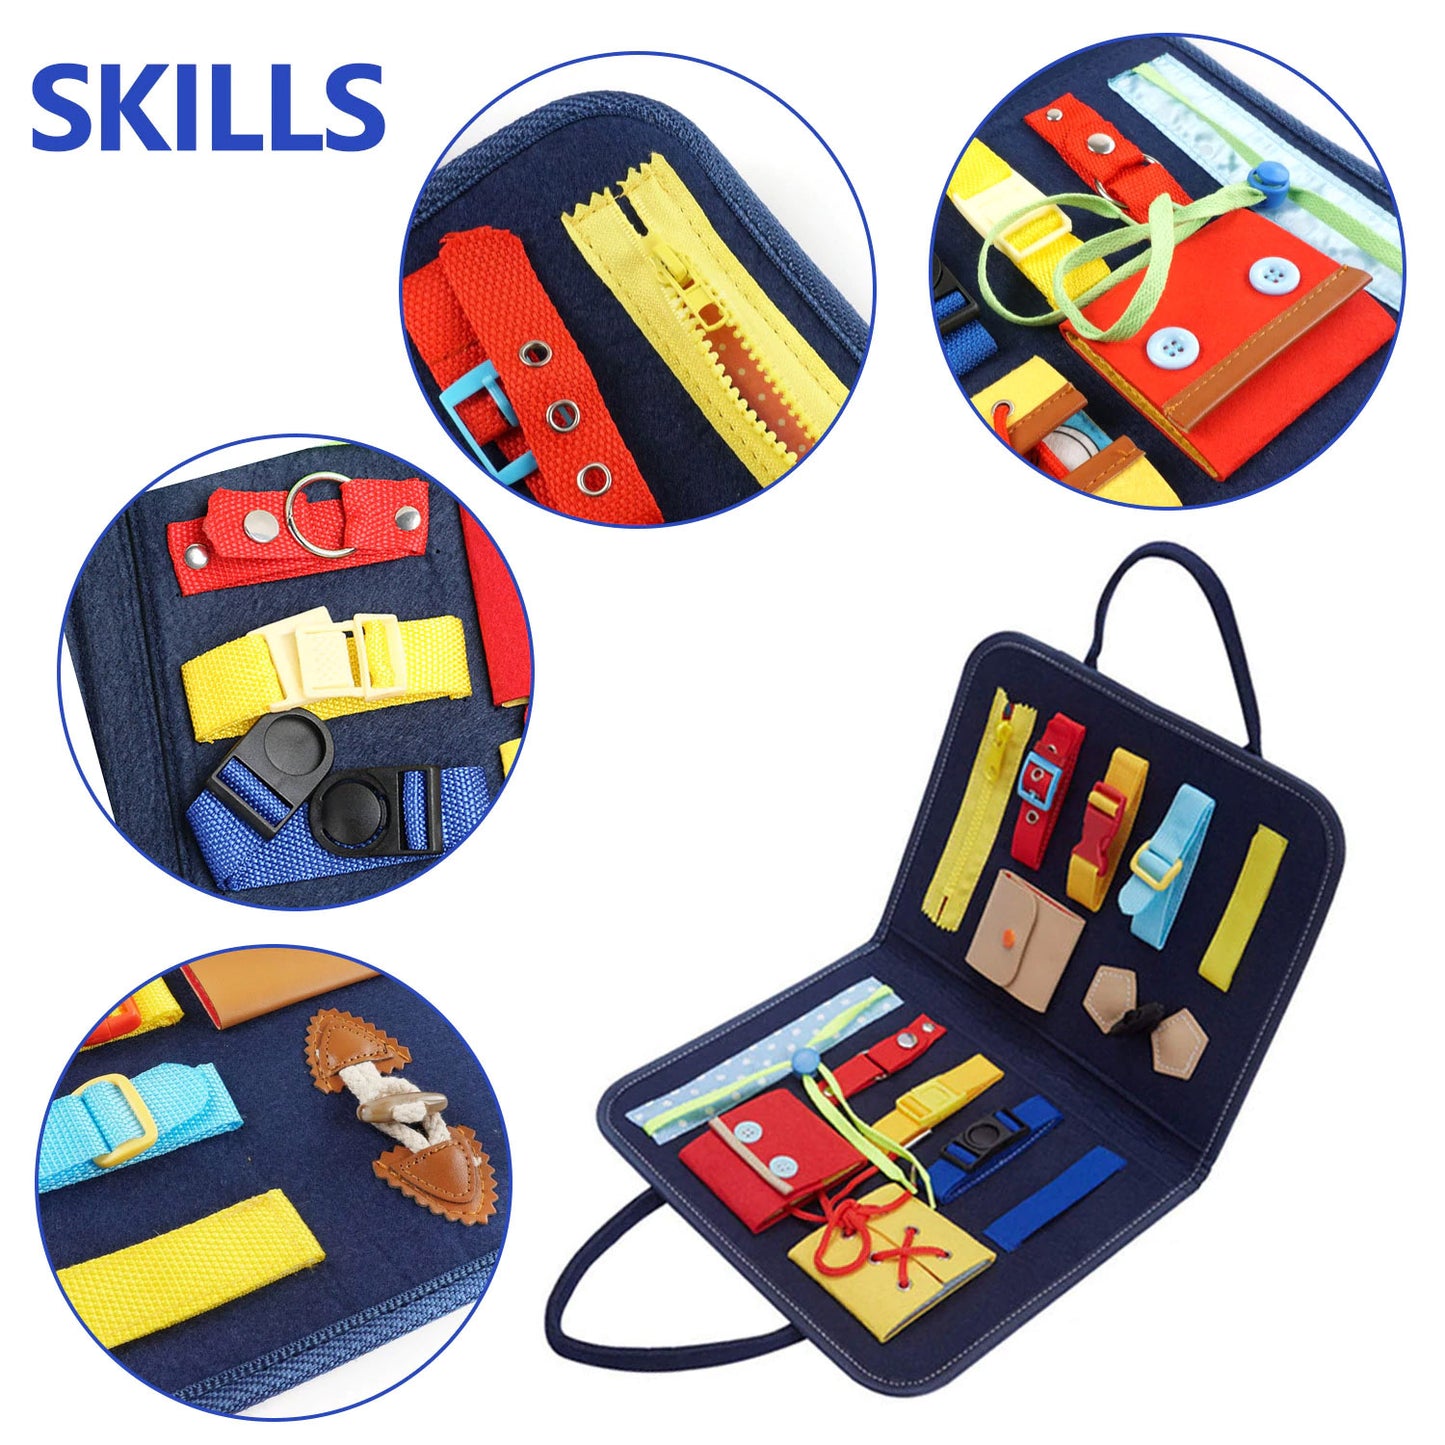 Basic Hand Skill Toys - Button/Zip/Fastener/Lace